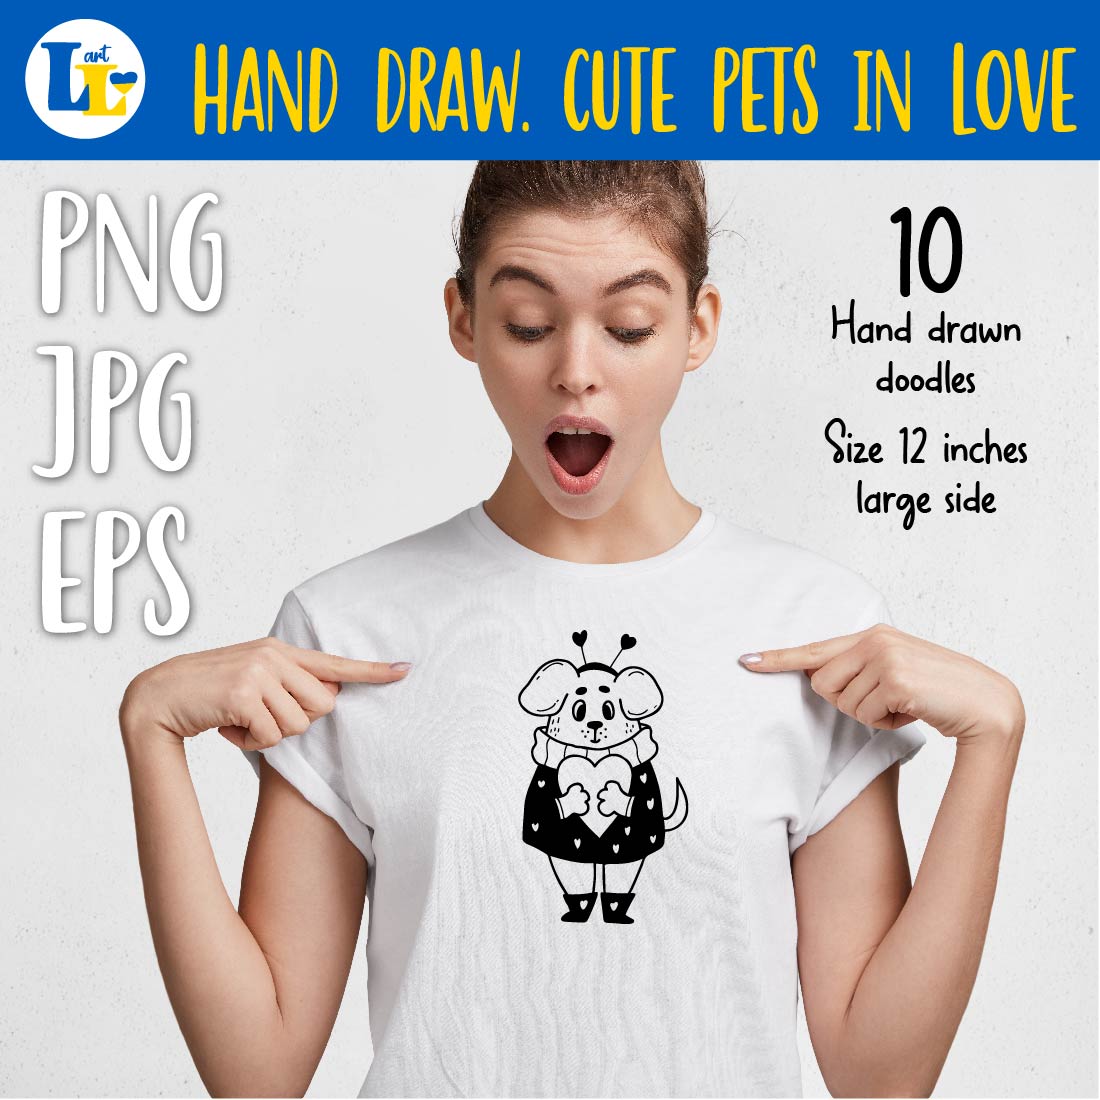 Cute in Love Pets Hand Drawn Doodle Design preview image.